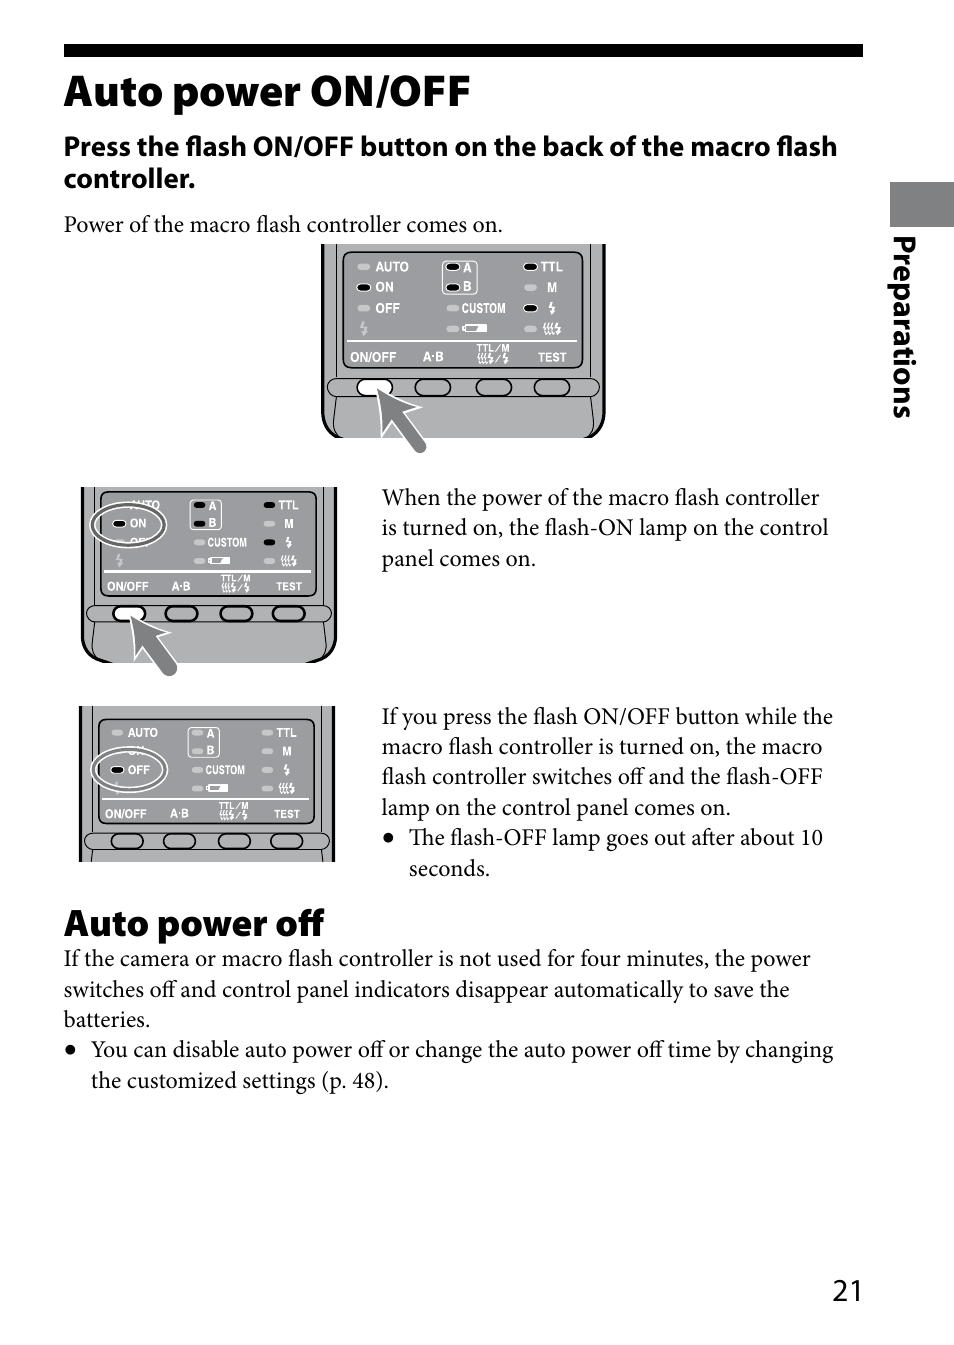 Auto power on/off, Auto power off, 1 pr epar ations | Sony HVL-MT24AM User Manual | Page 21 / 295